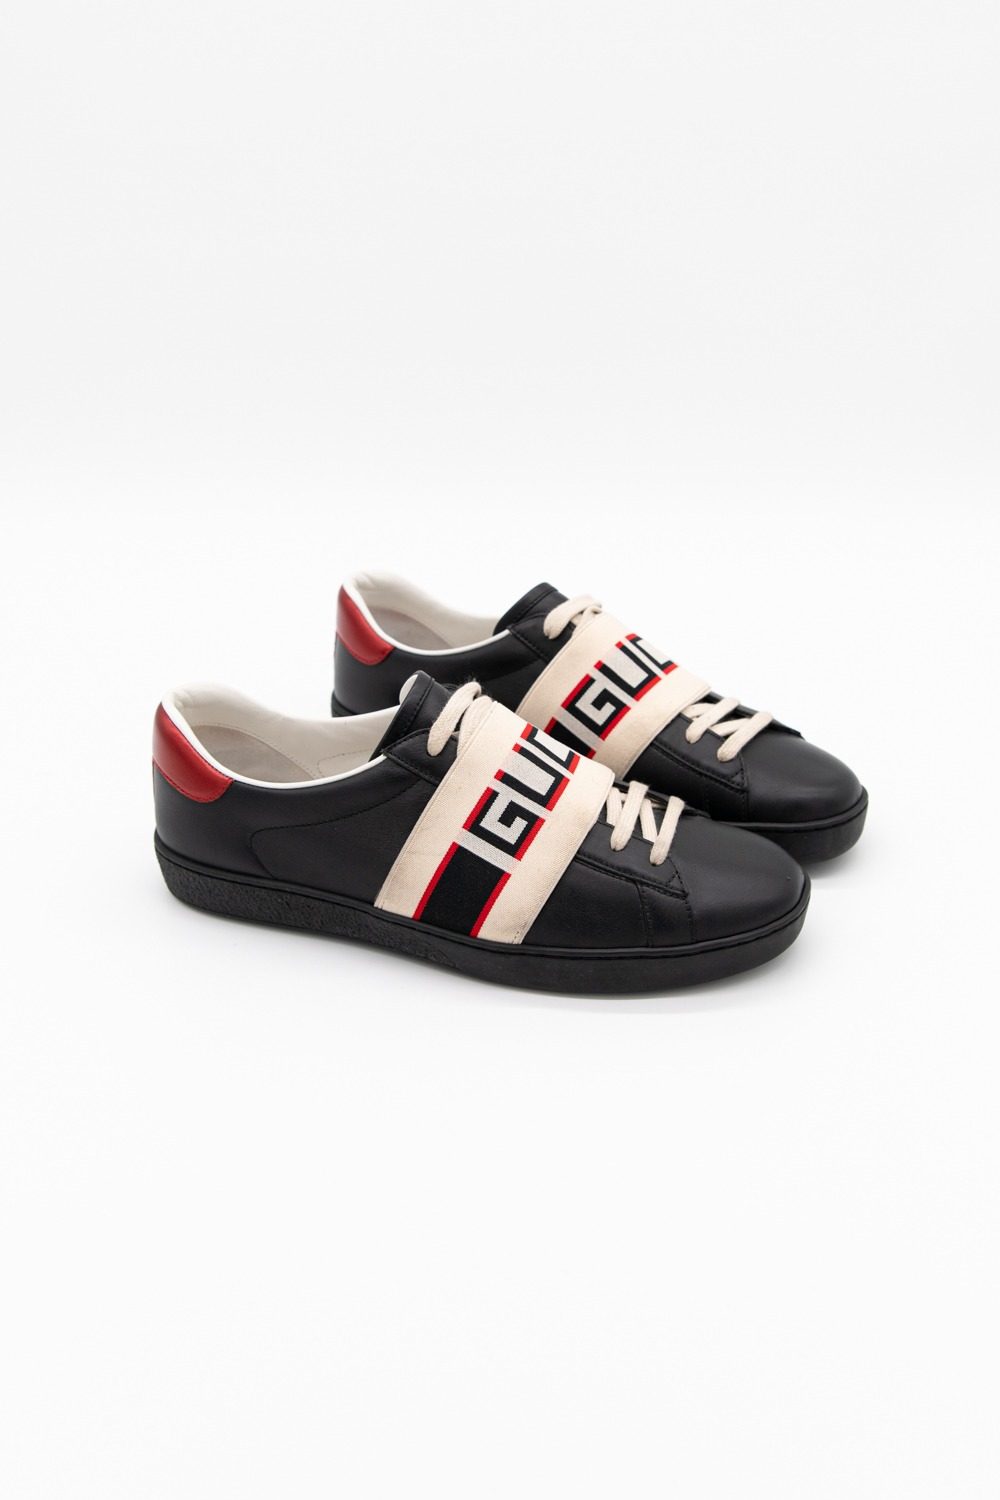 Thumbnail of http://Gucci%20Sneaker%20in%20Schwarz%20mit%20Querband